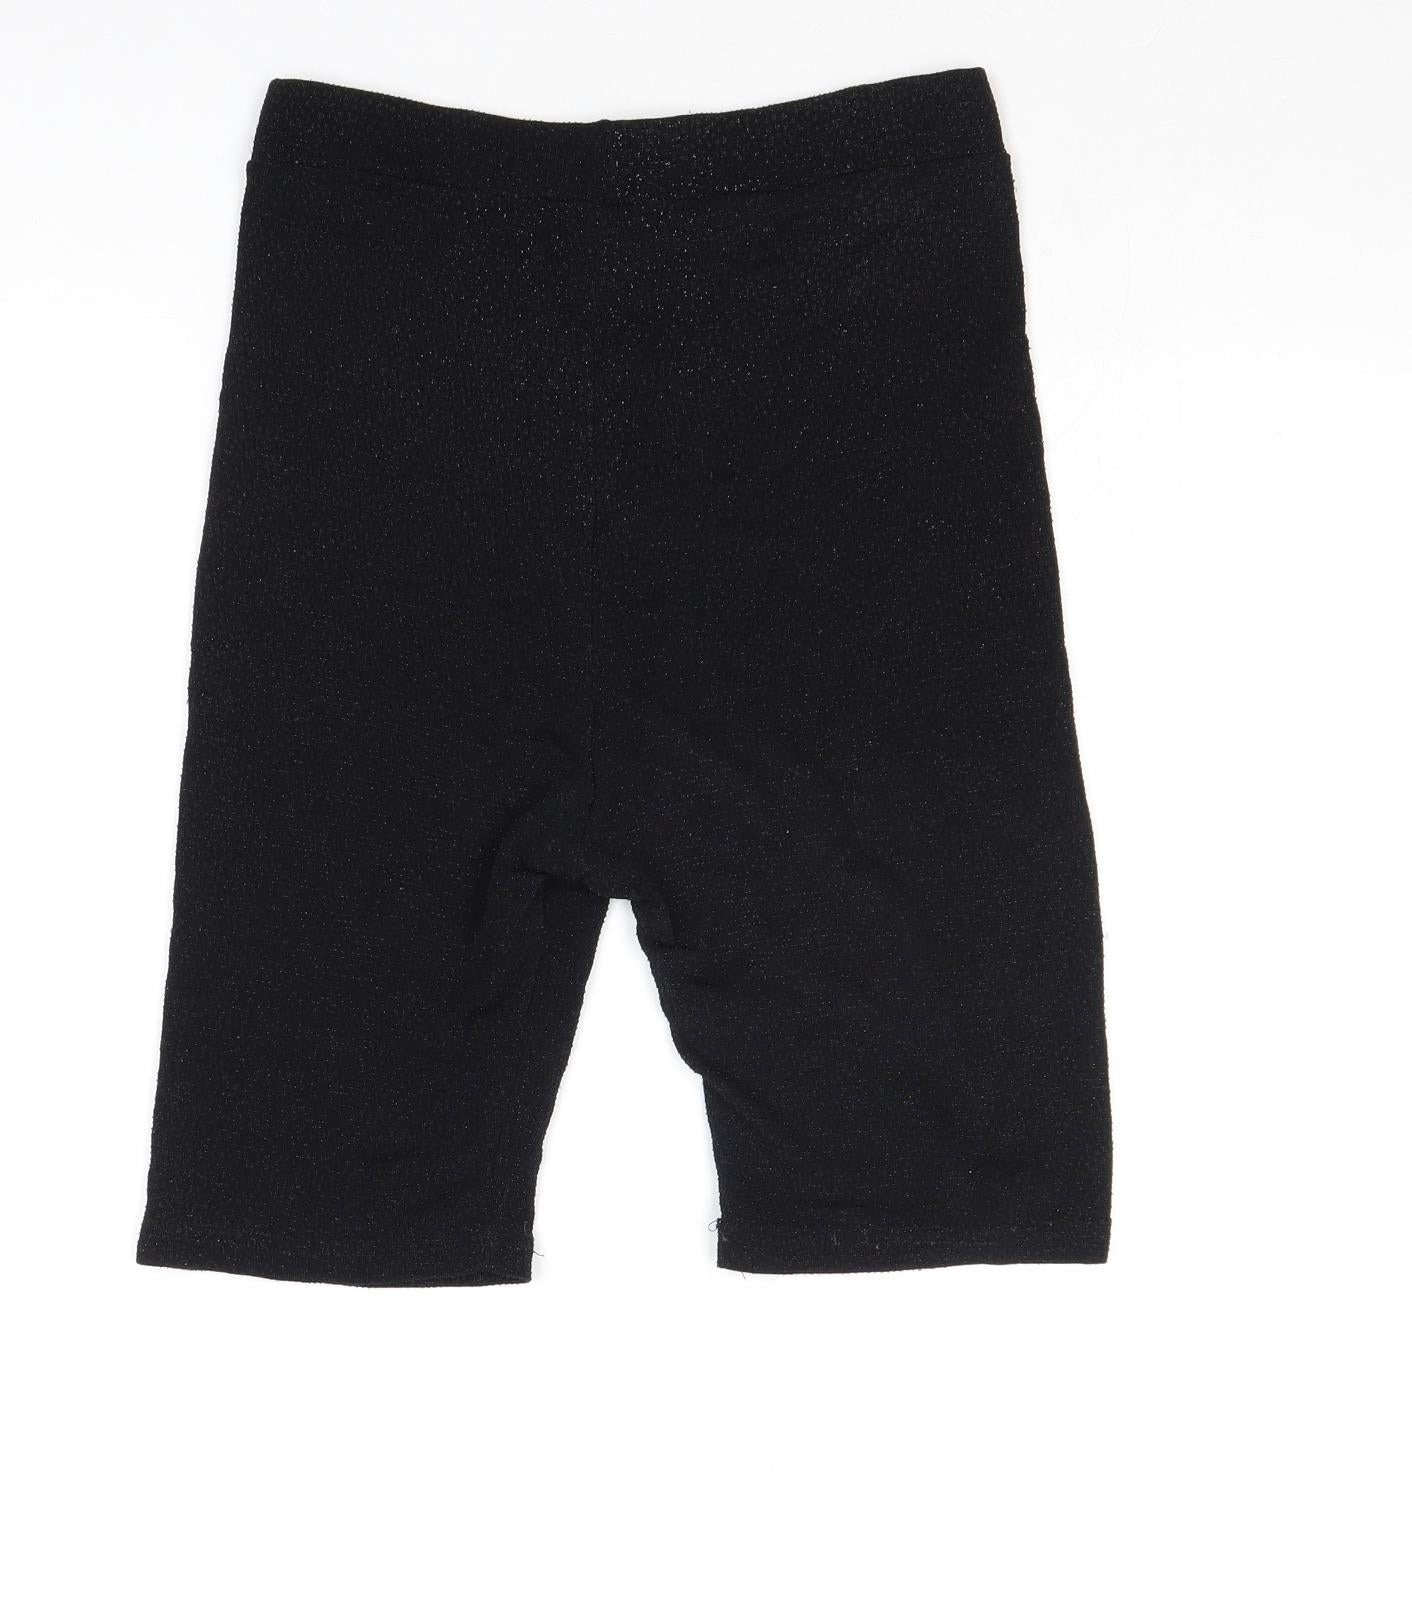 Urban Outfitters Womens Black Polyester Compression Shorts Size M Regular Pull On